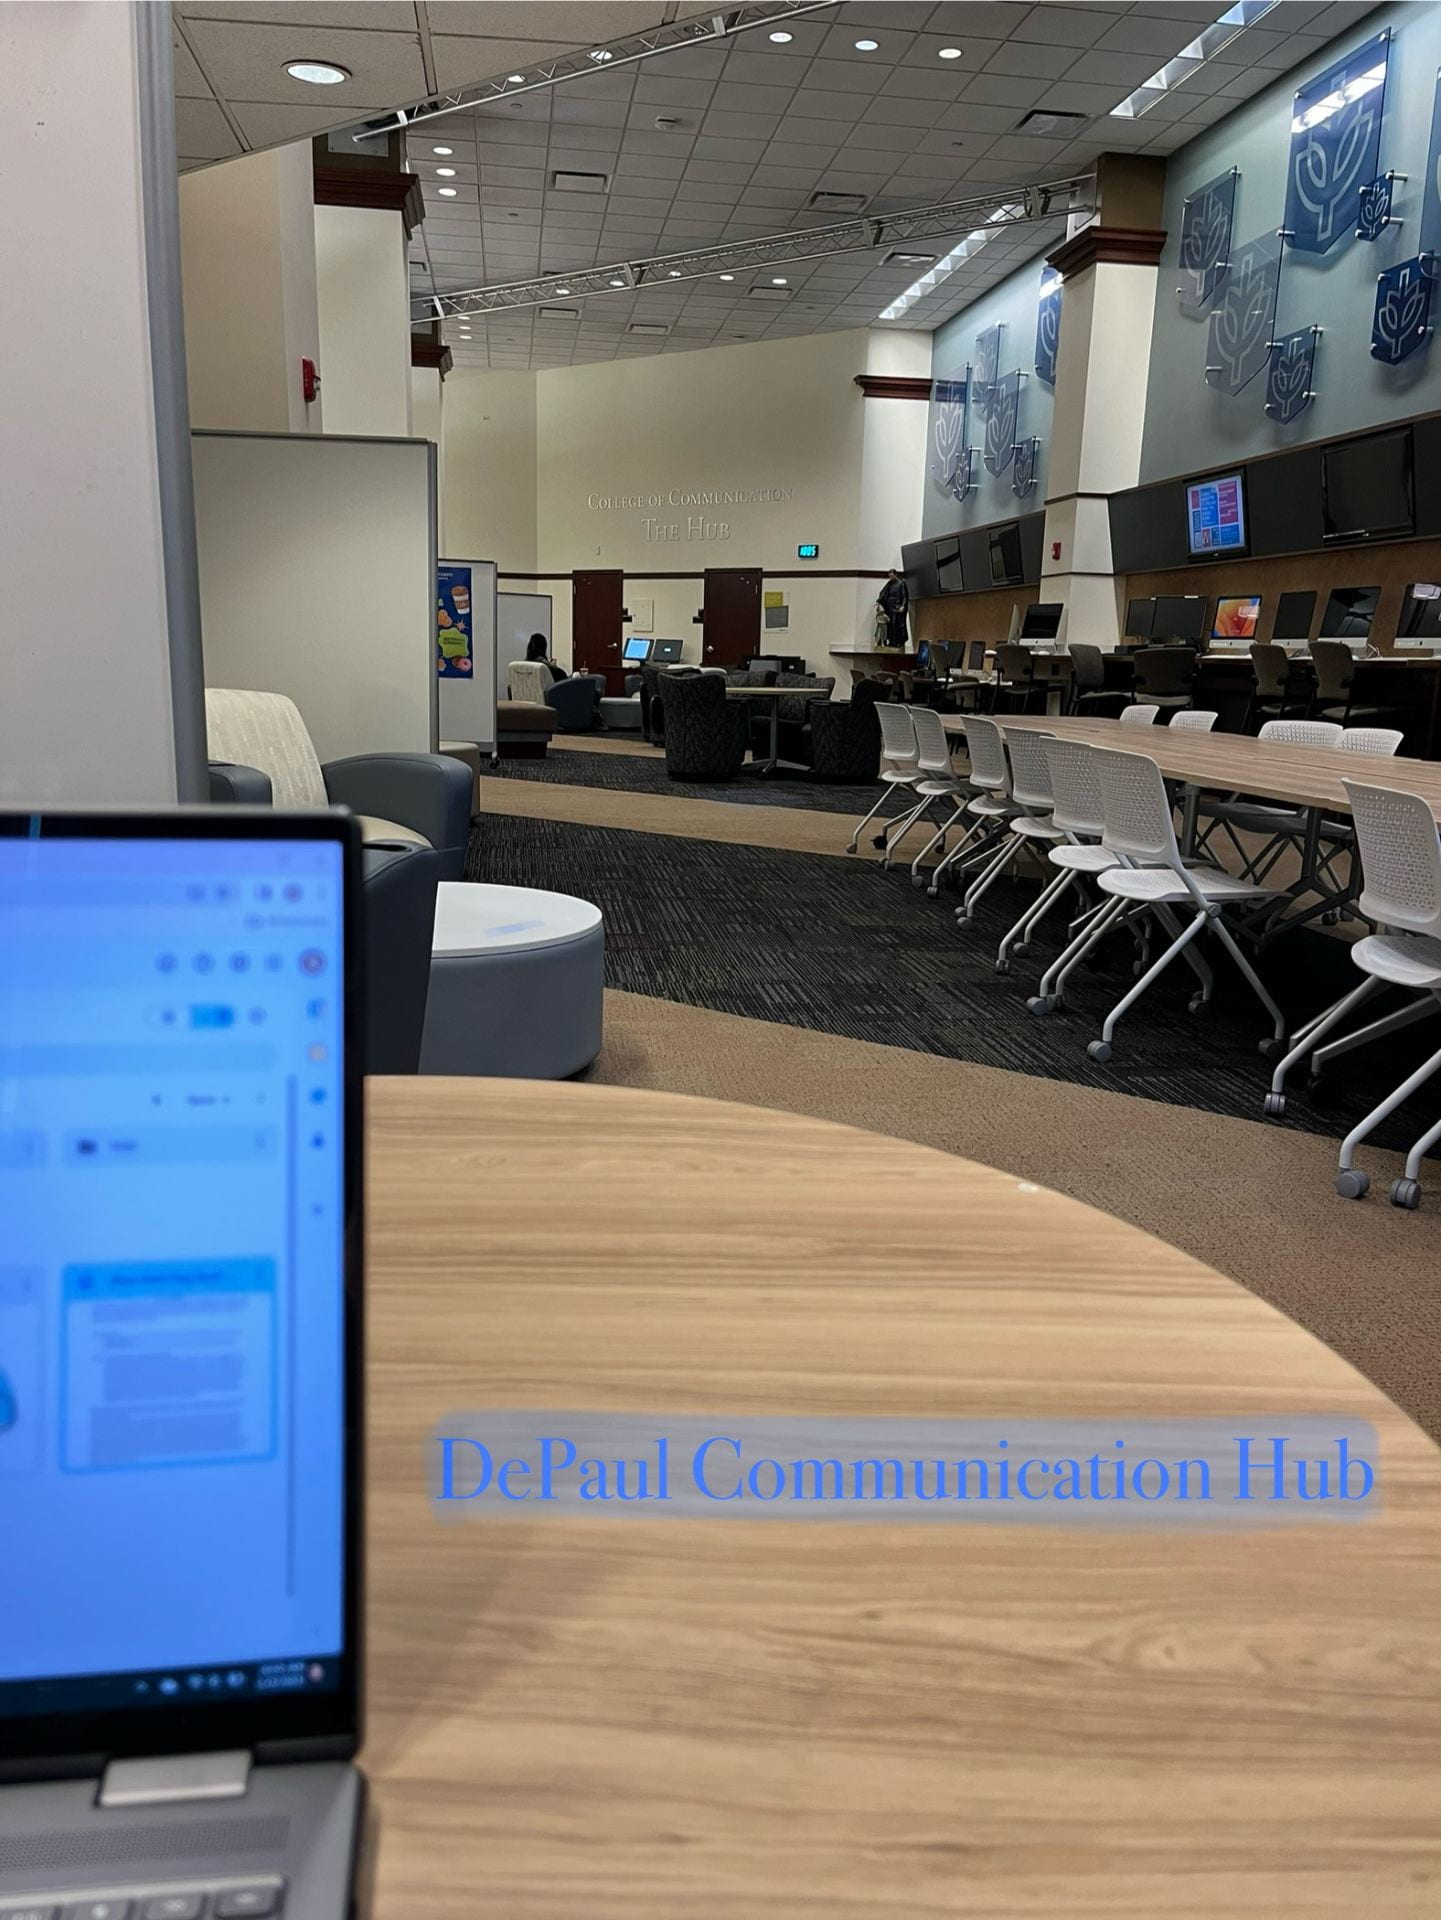 A laptop open on the edge of the screen, facing out lots of tables, computers, and comfy chairs in a computer lounge located at DePaul. With the words “DePaul’s Communication Hub” in blue at the bottom. 